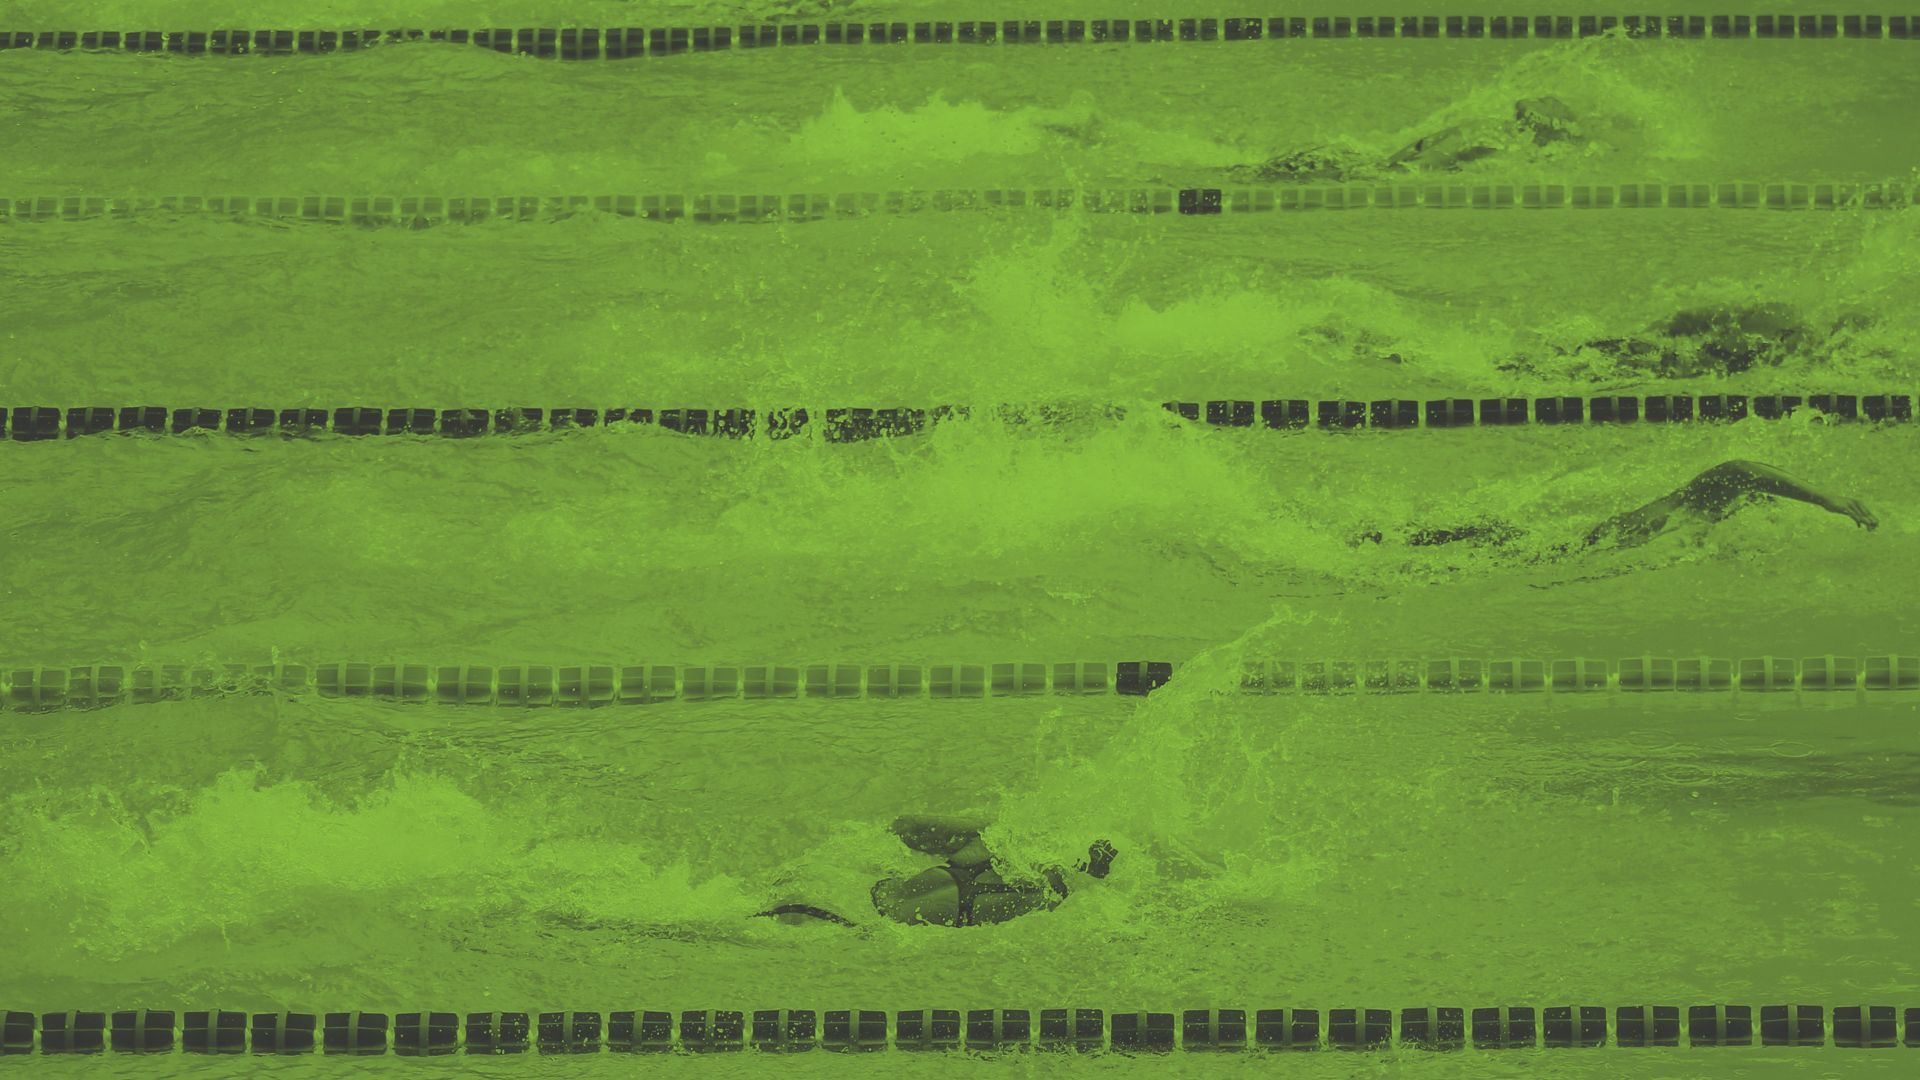 An image of swimmers in a municipal or school pool - this award funds schools with sports facilities that can be shared with the wider community